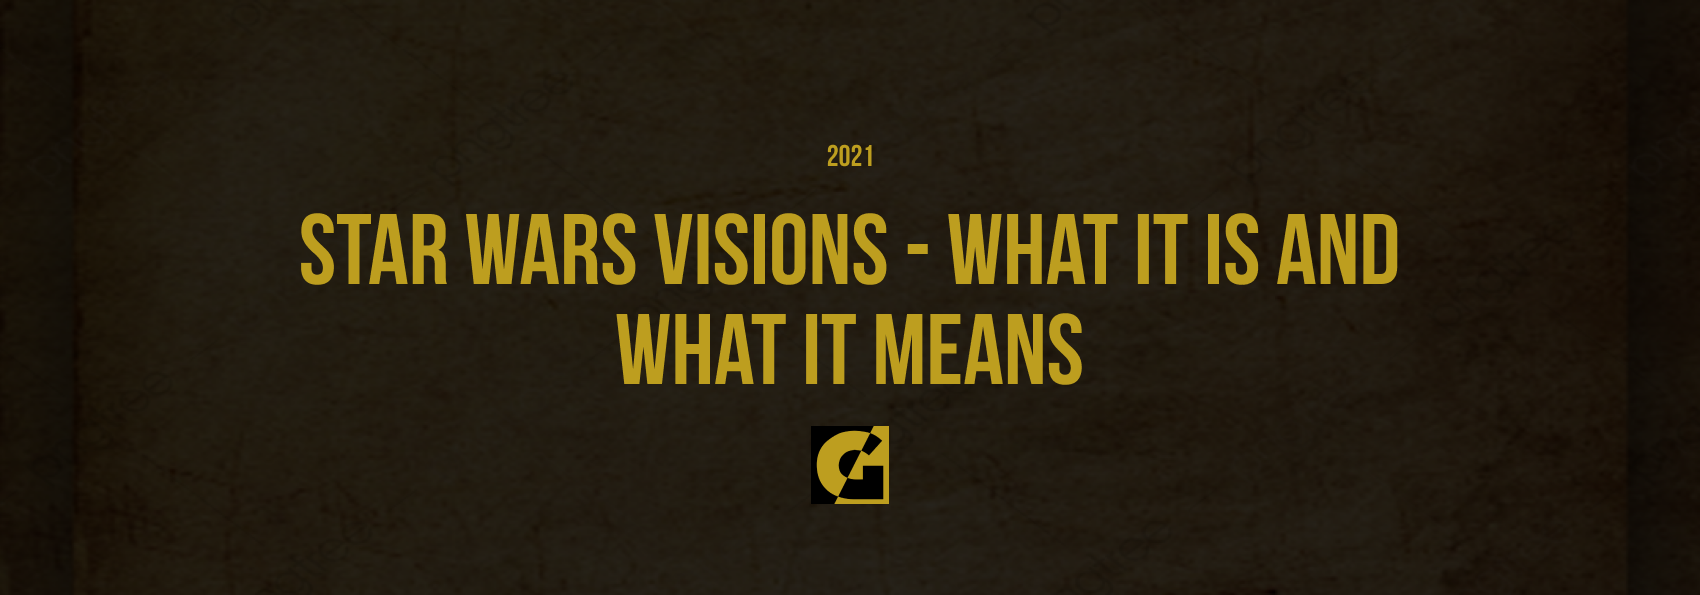 Star Wars Visions - What it is and What it Means